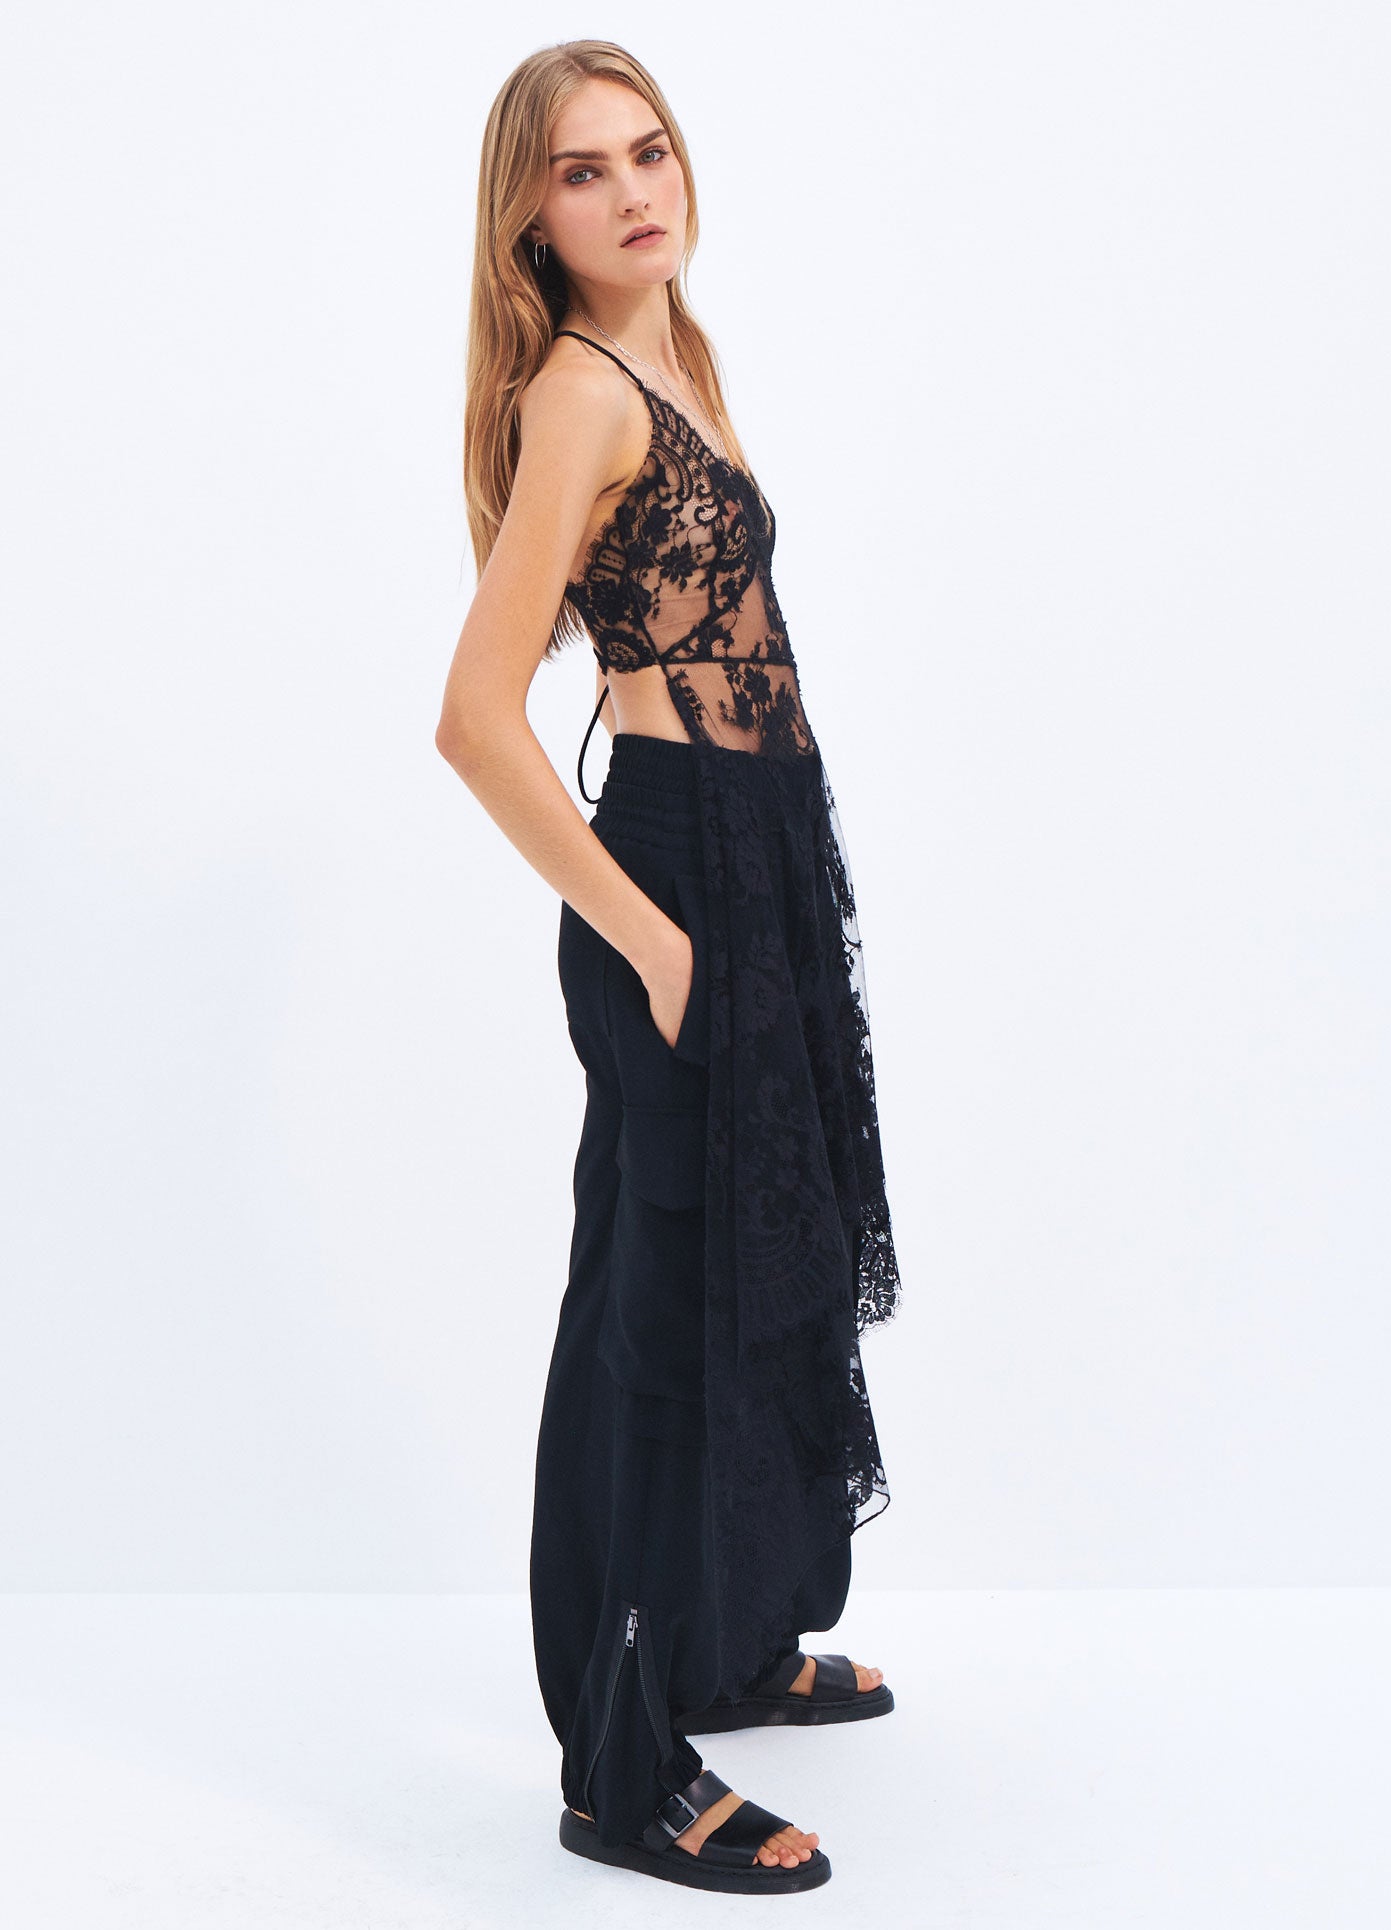 MONSE Spring 2024 Tie Back Lace Top in Black on model side view